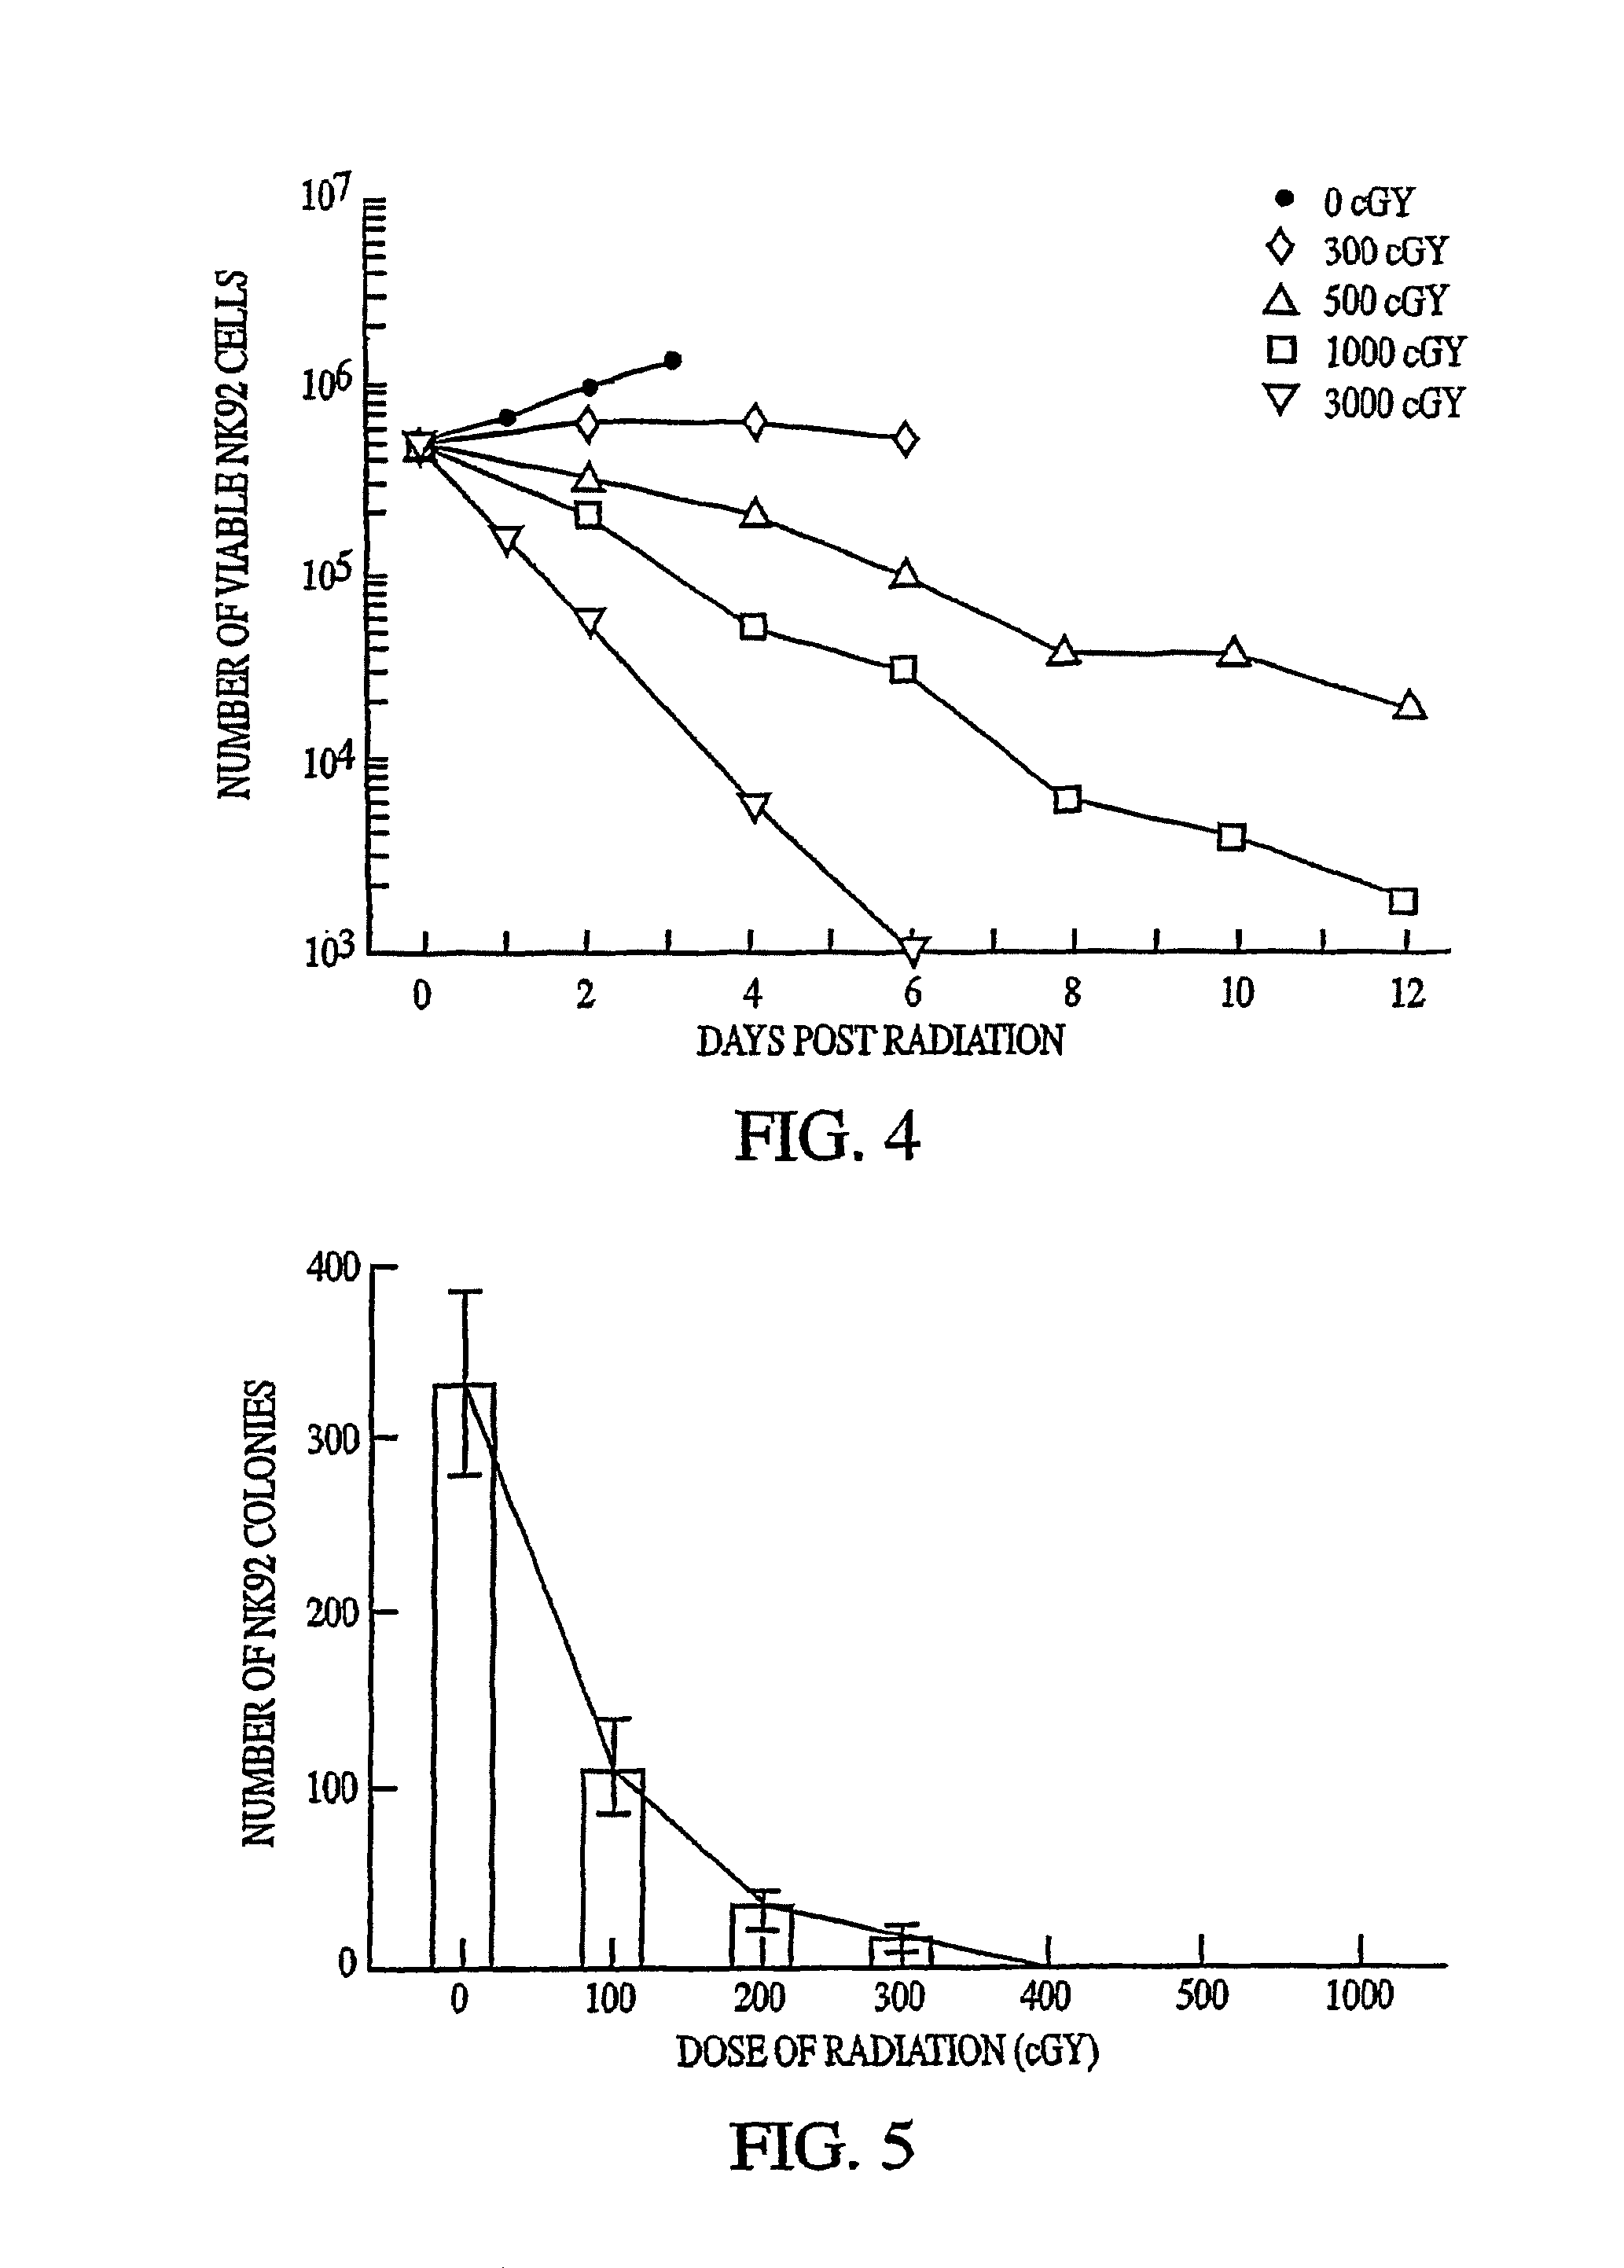 Interleukin-secreting natural killer cell lines and methods of use